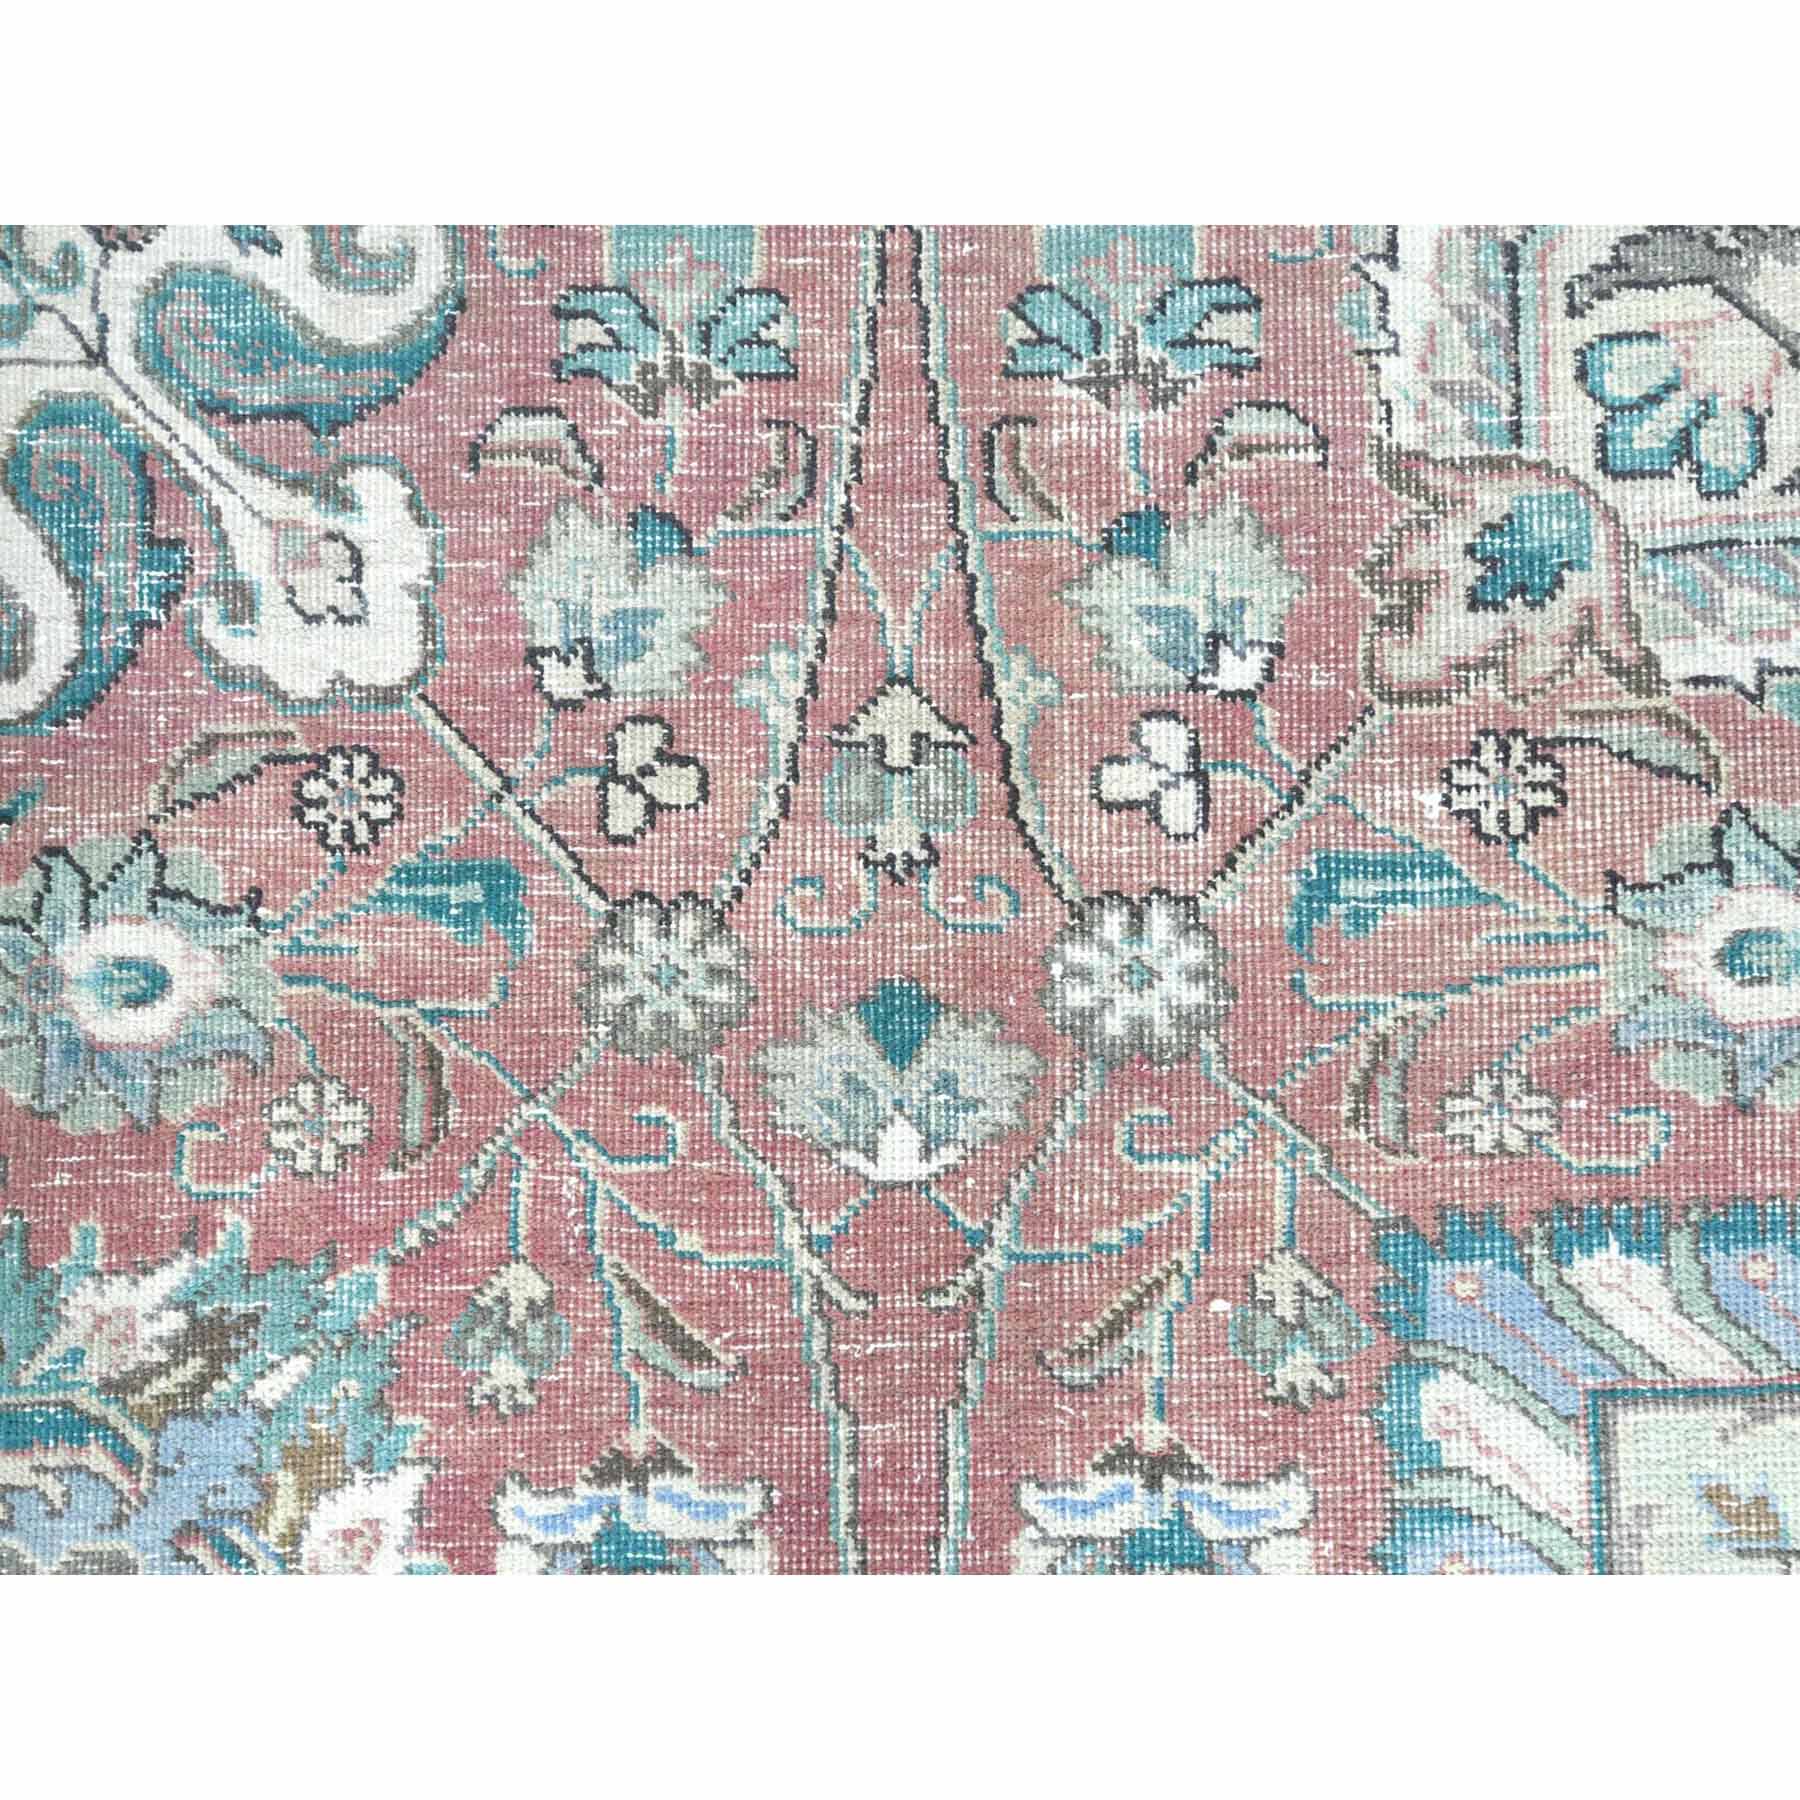 Overdyed-Vintage-Hand-Knotted-Rug-408710